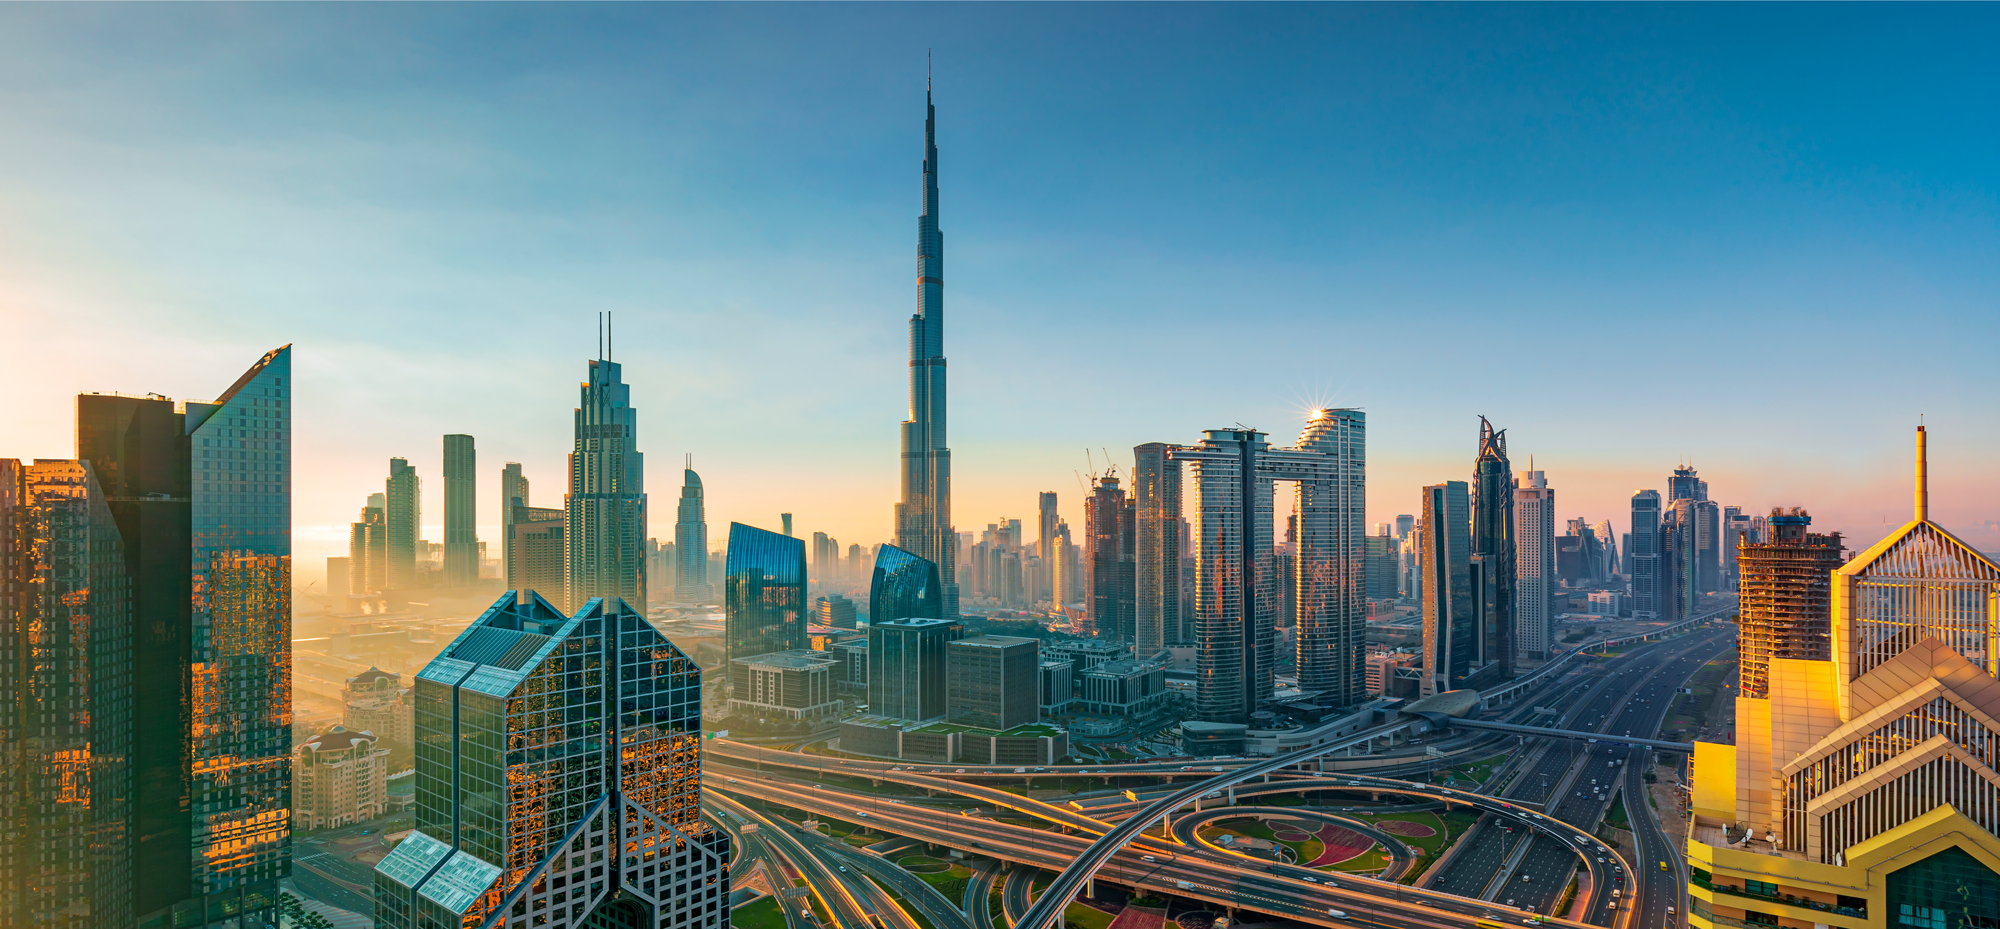 The Complete Guide To The Retail Summit, Dubai 